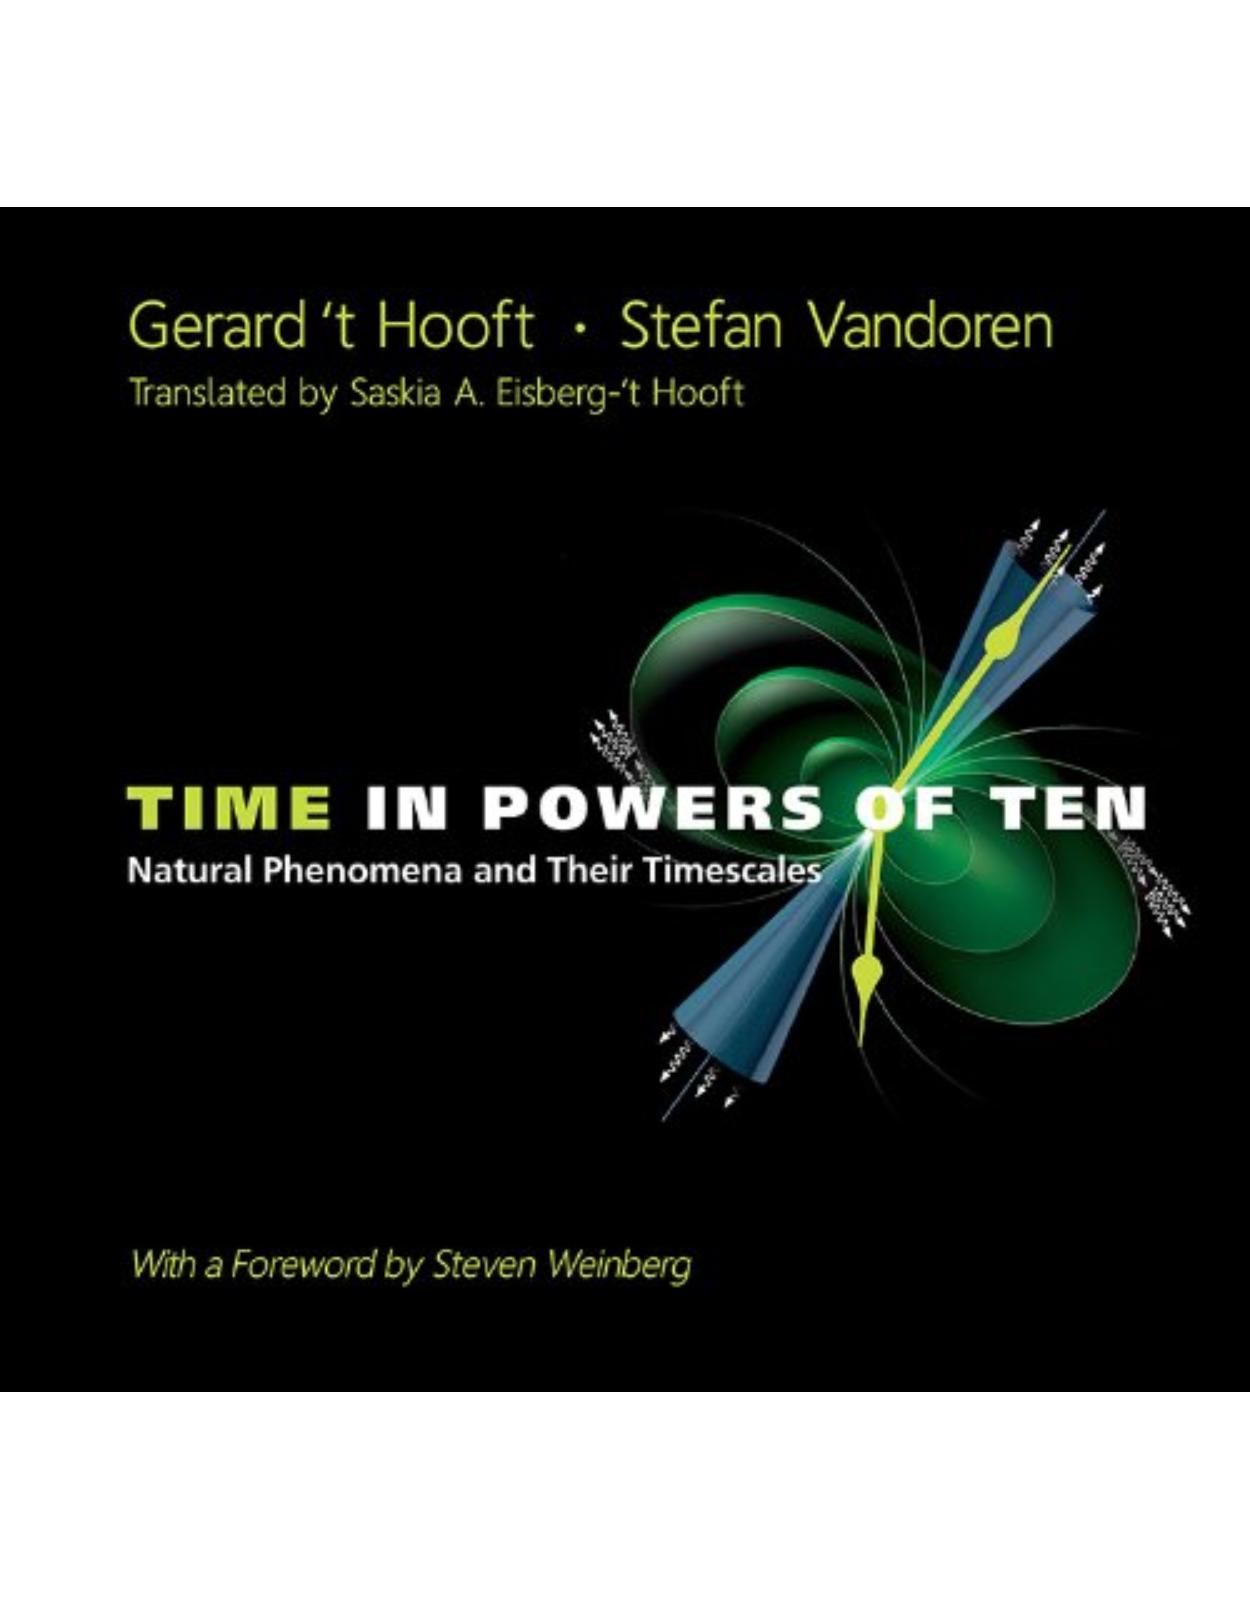 Time in Powers of Ten: Natural Phenomena and Their Timescales